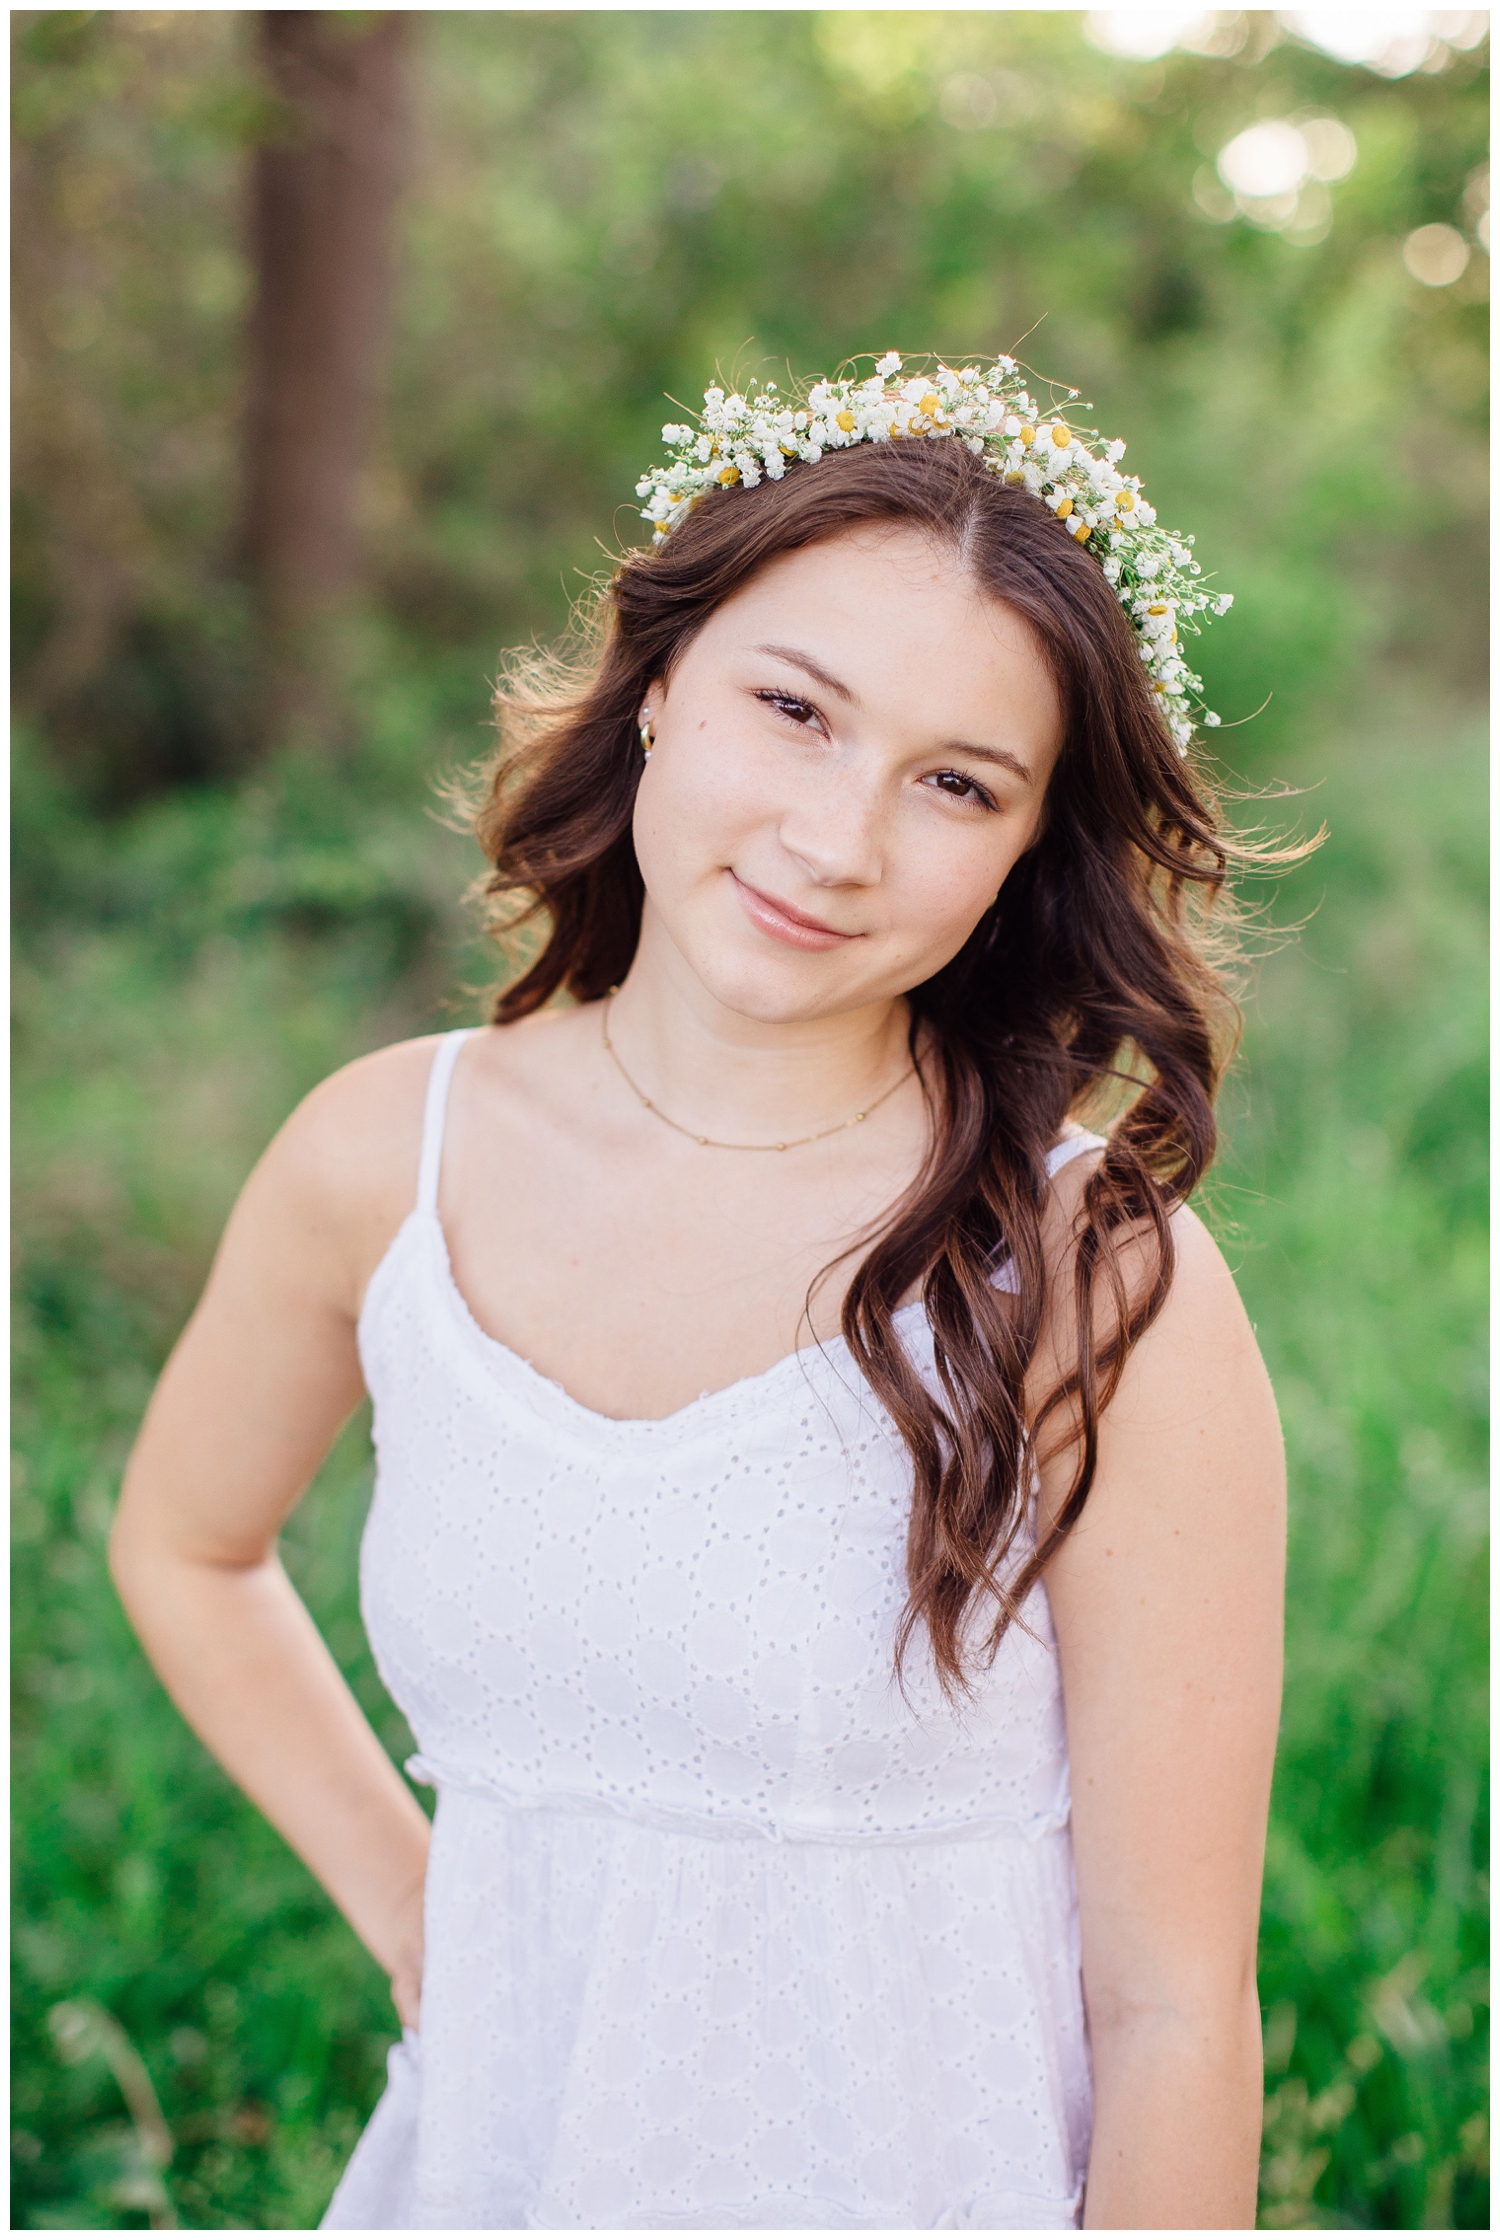 spring senior photos Houston with girl in white sundress wearing flower crown standing in a field